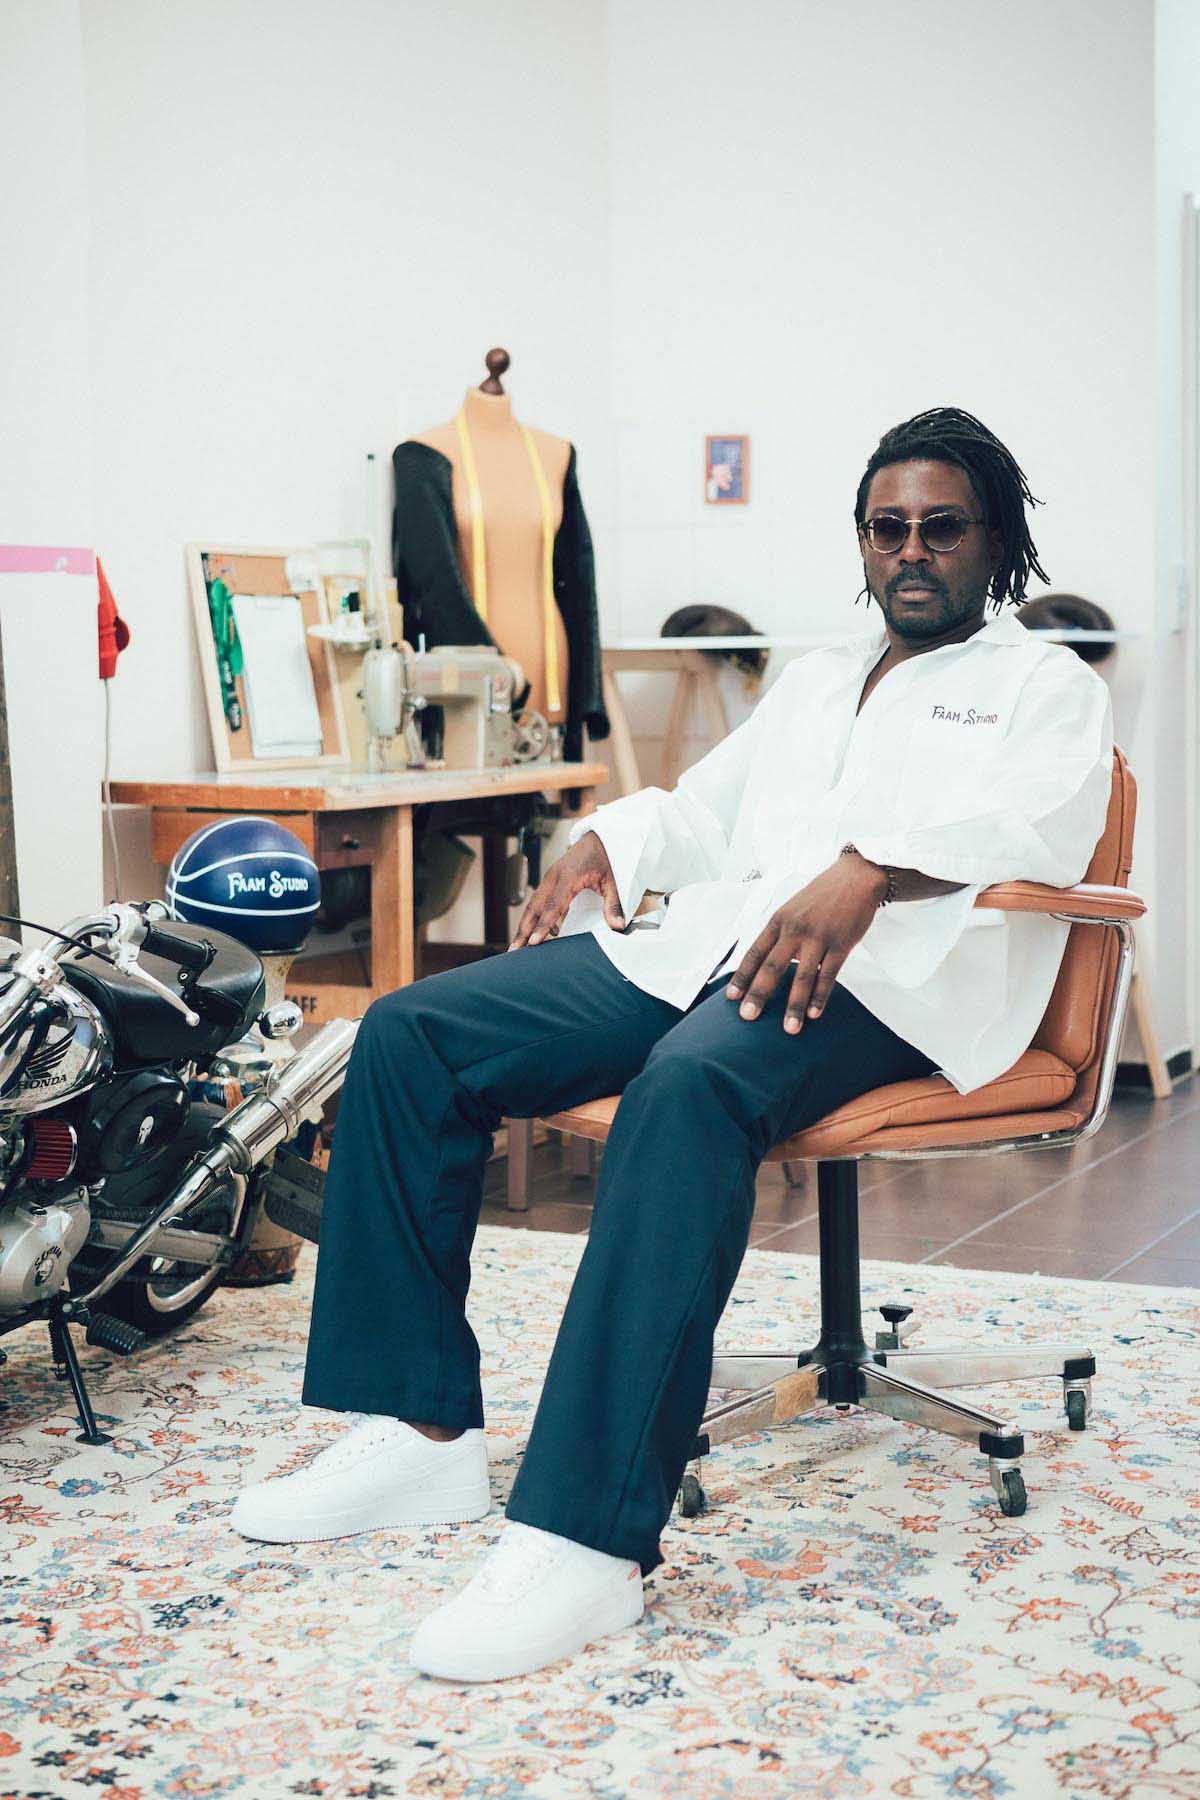 Stéphane Moun alias FAAM, Black person with thin, neck-length dreadlocks sits casually on an orange chair with wheels, which stands on a large carpet. He wears a moustache and chin beard, a white oversized shirt, dark blue trousers and white trainers. He rests his arms loosely on the backrests and looks at the camera. Behind him, a tailor's dummy with a tape measure around its neck and a sewing machine can be seen. To his left there is also a motorbike for decoration.